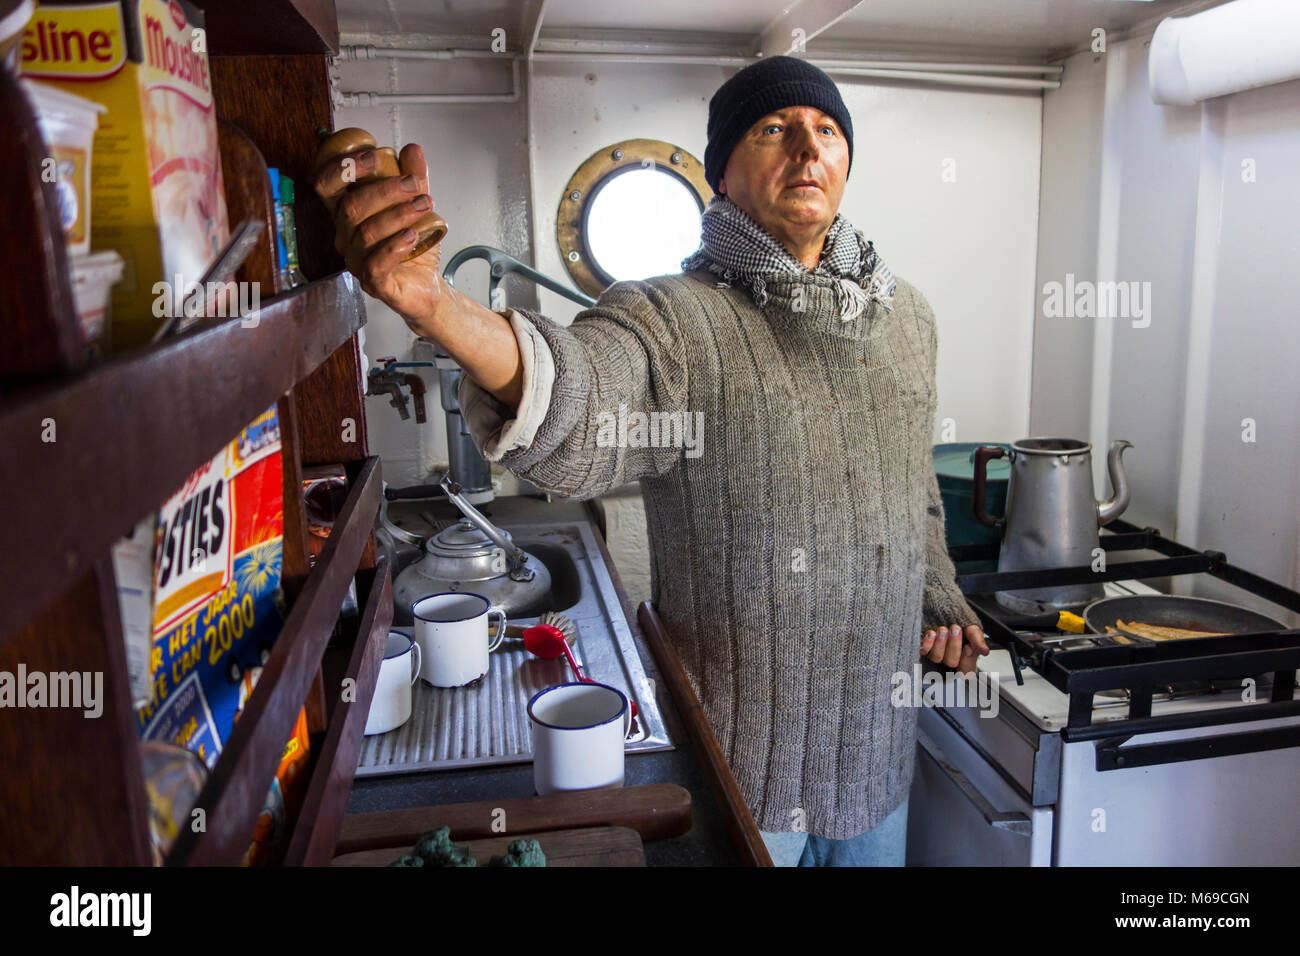 Crew member cooking breakfast in galley of the last Iceland trawler Amandine, renovated fishing boat now museum in Ostend, Belgium Stock Photo